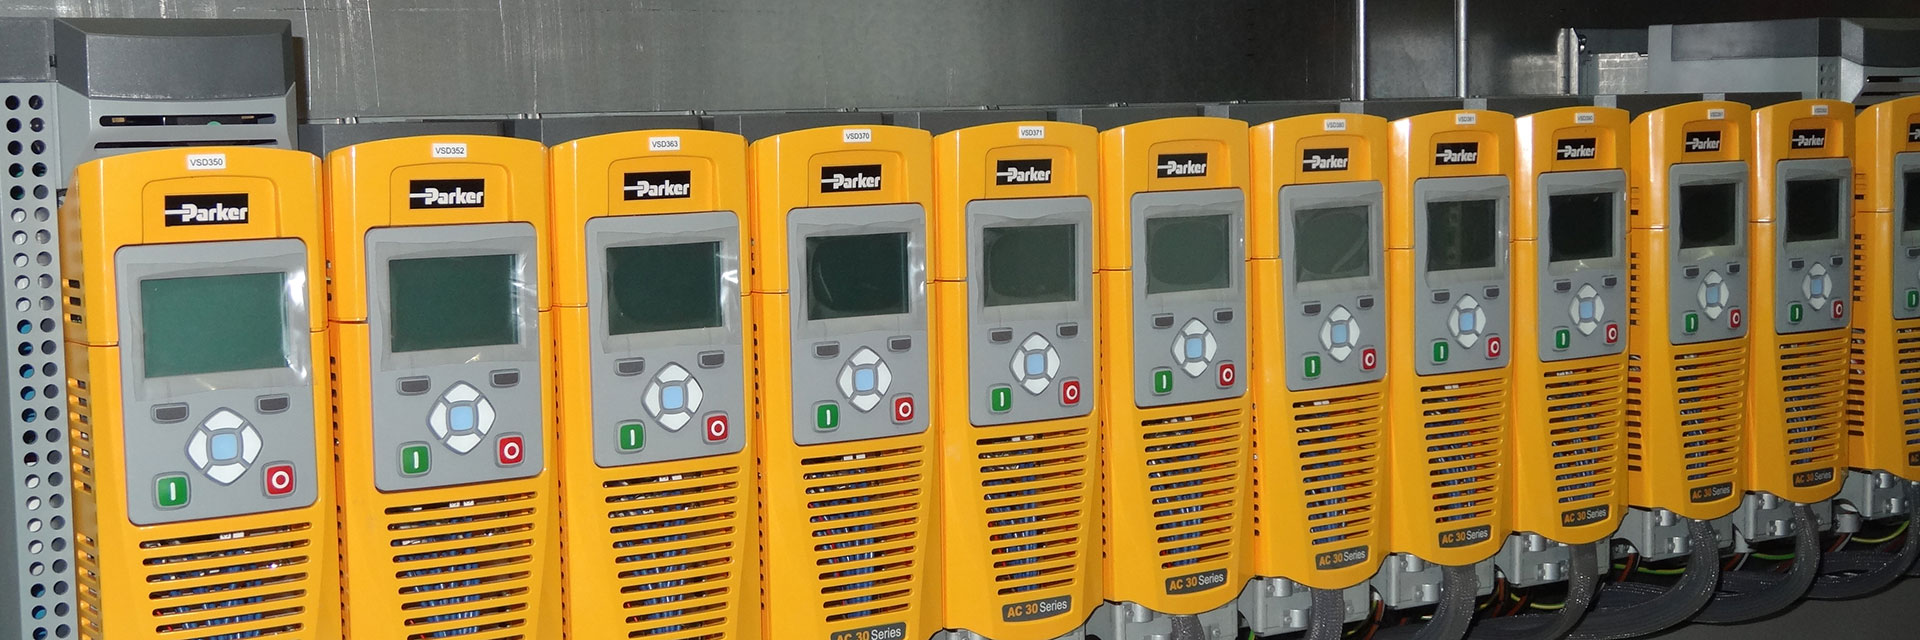 Parker Variable Speed Drives